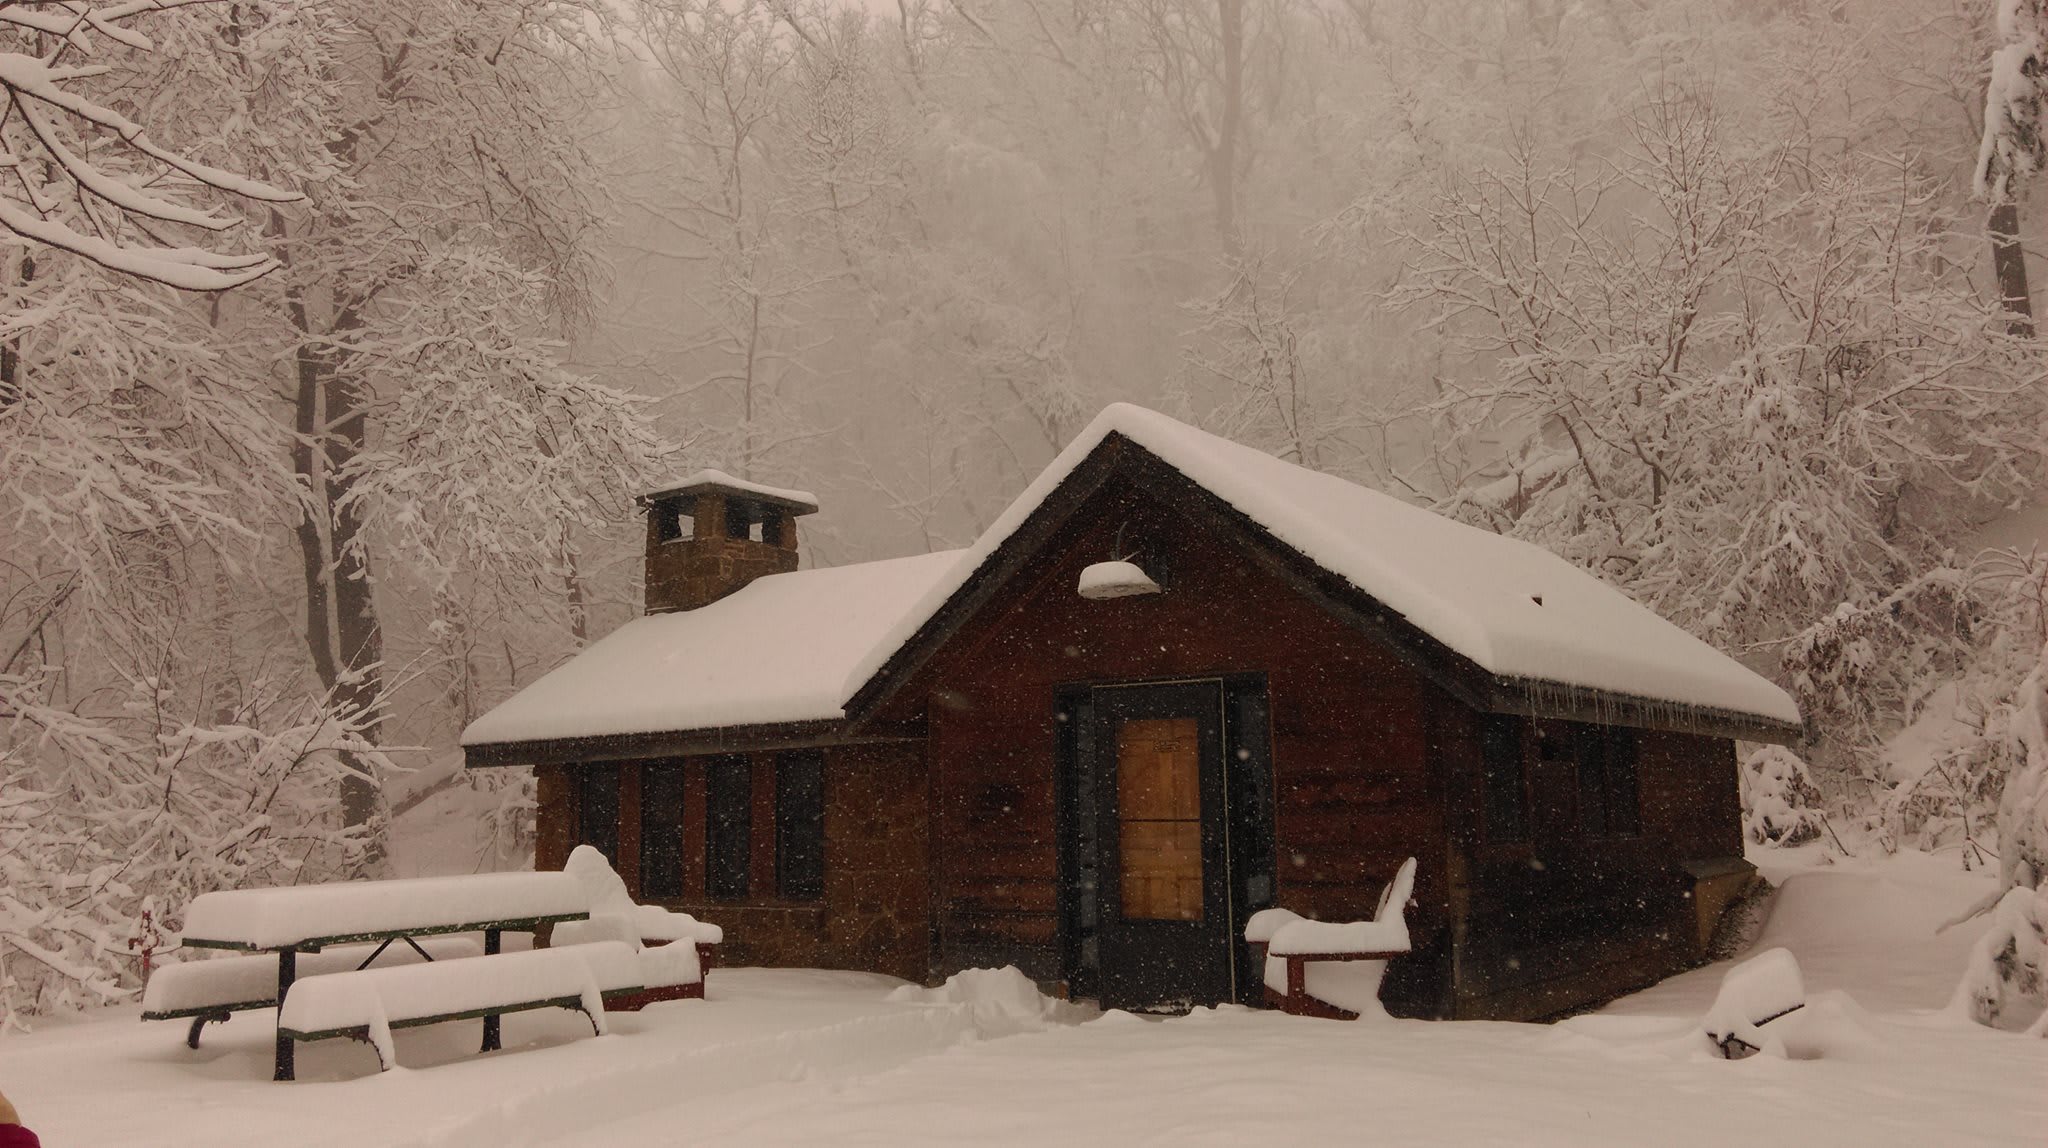 A cabin, in the woods, by the river, on a snowy morning. The warmth inside from the fireplace. Life is quiet, and good. 